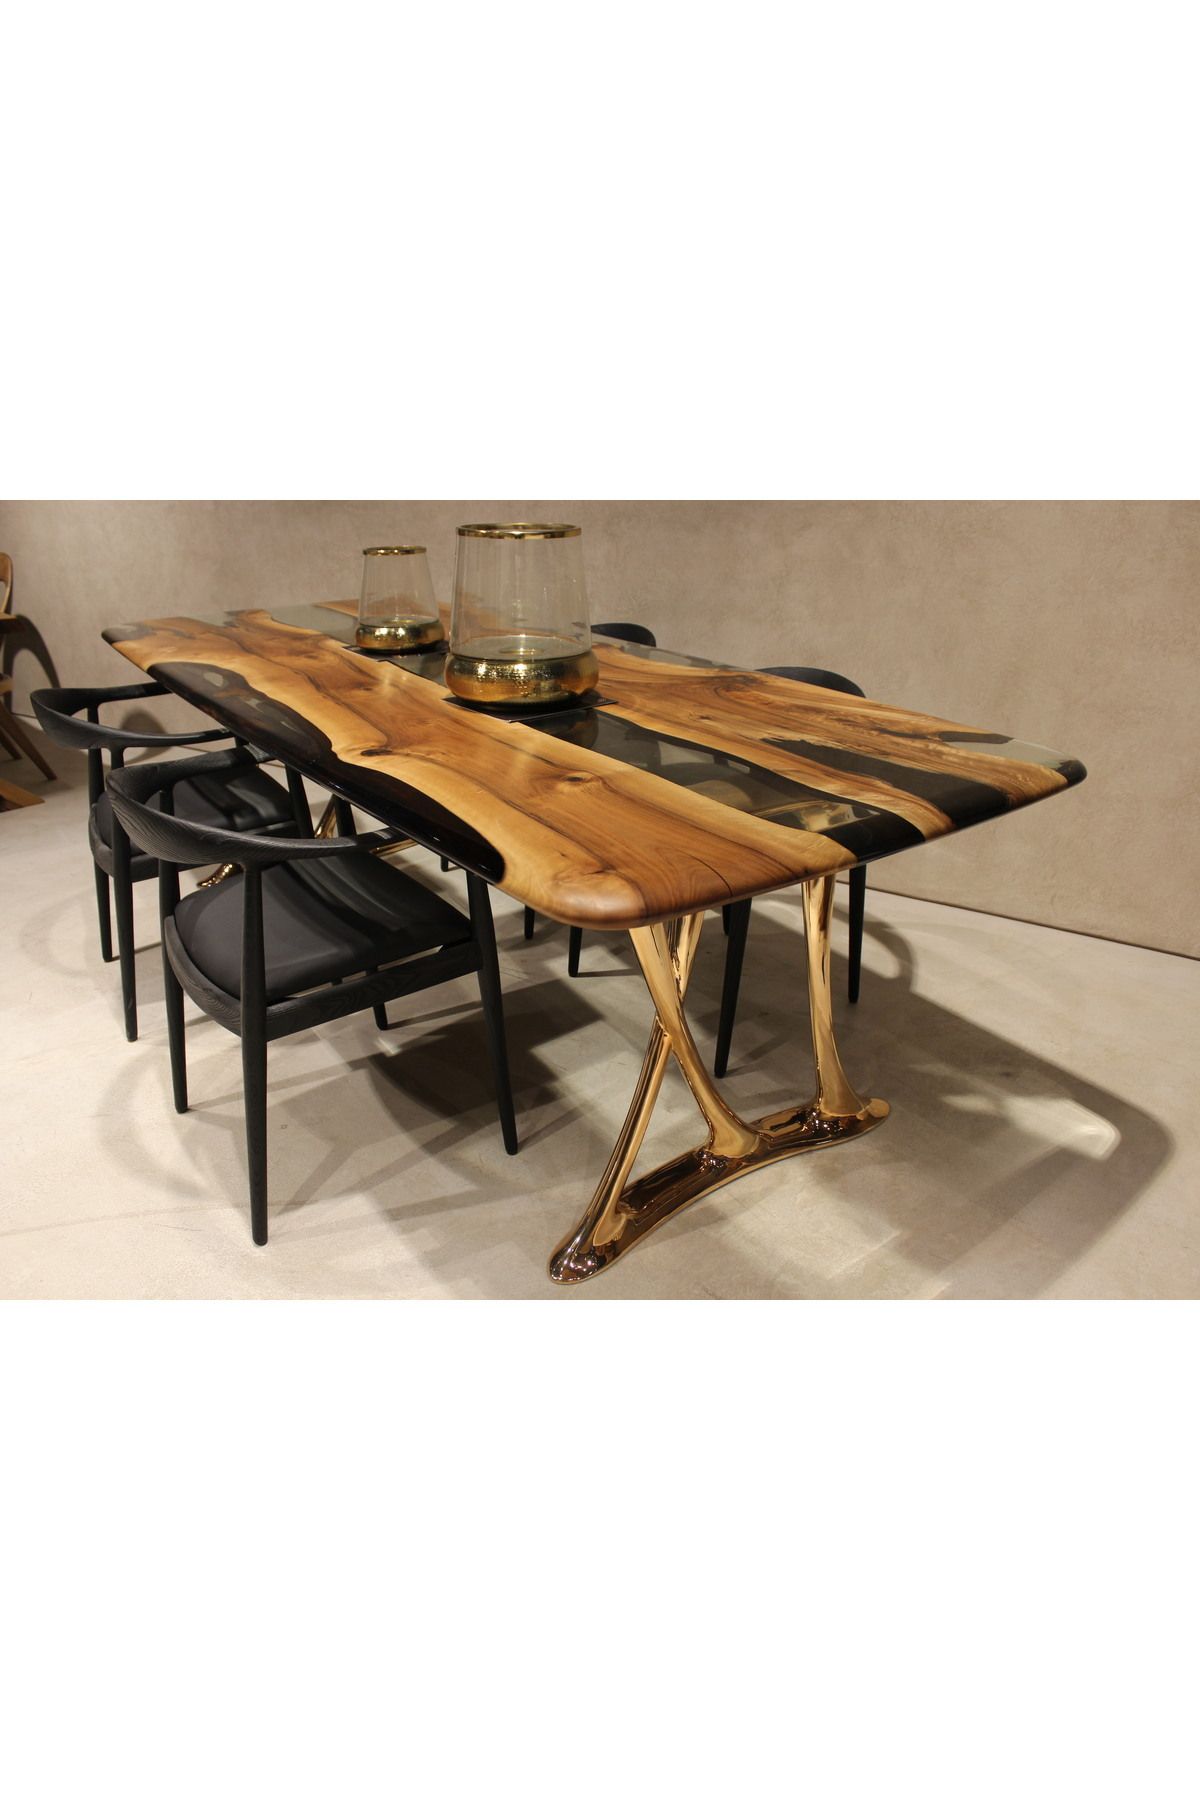 gizzwood 110x270cm Epoxy Resin Walnut Dining Table With RosegoldLegs